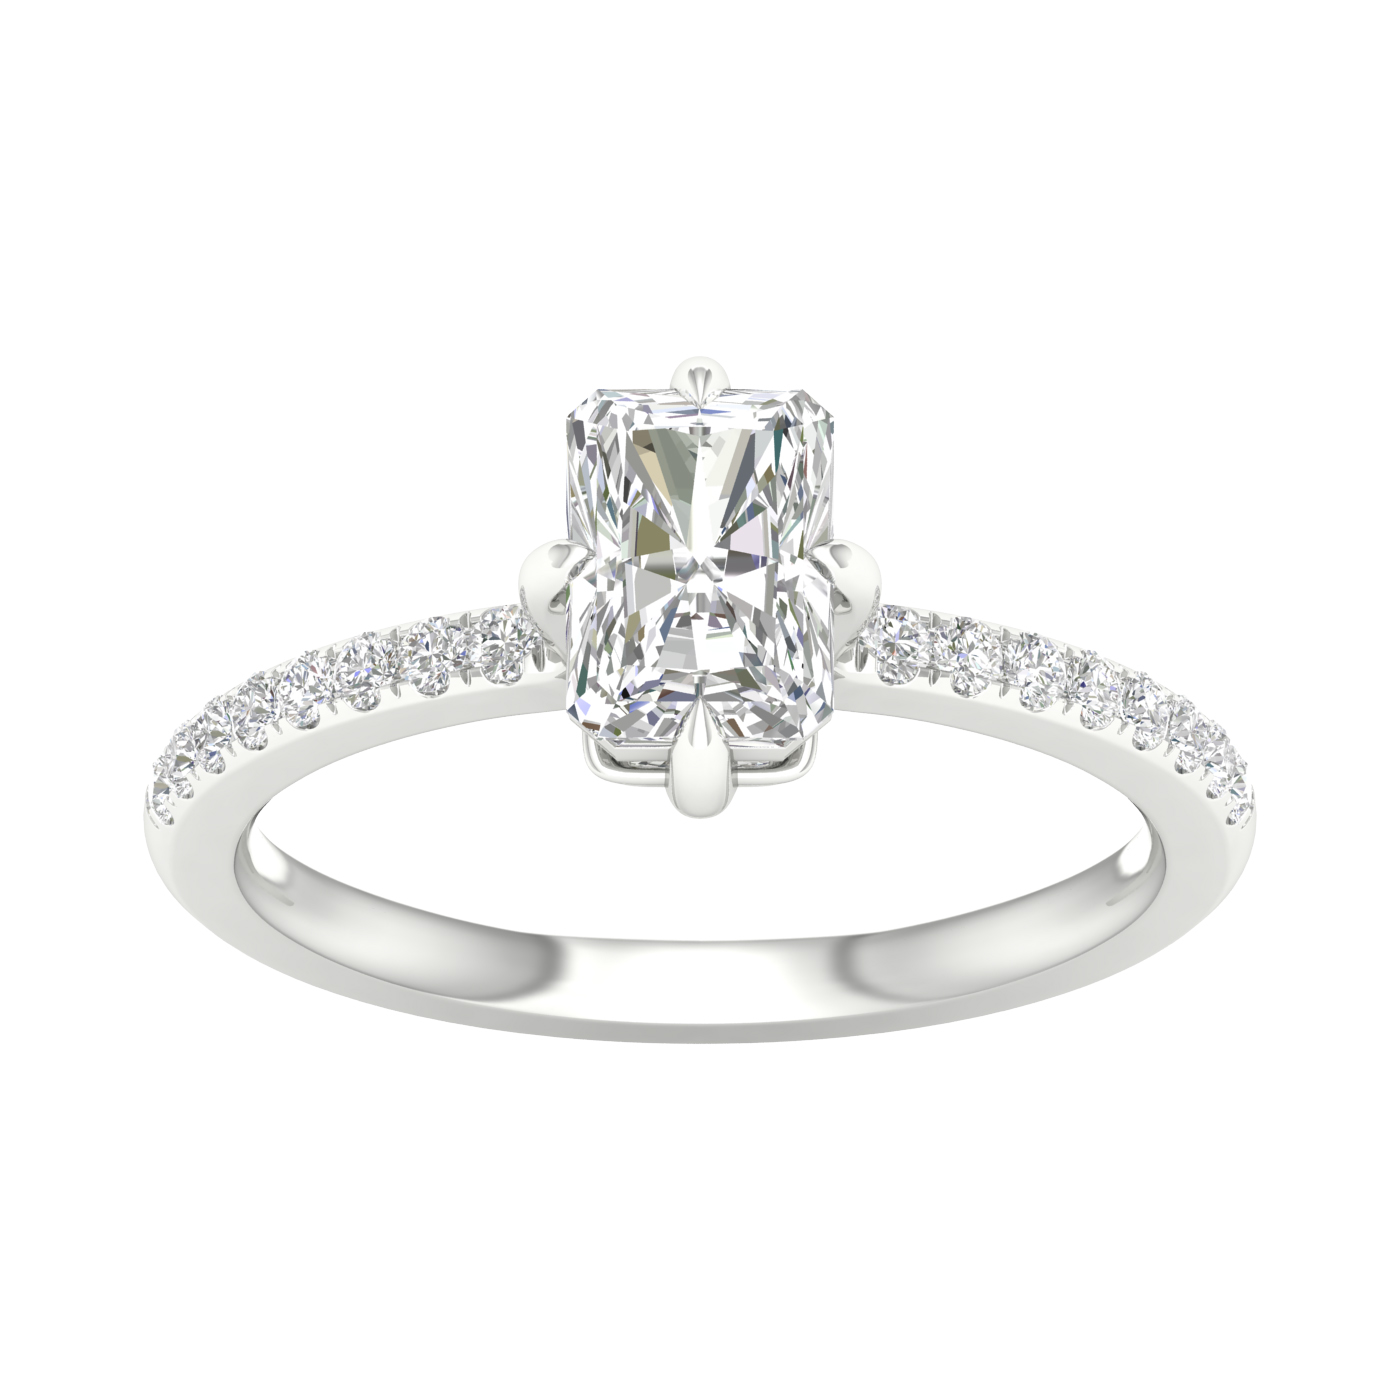 1.16ct. Diamond East West Prong Engagement Ring (Radiant)